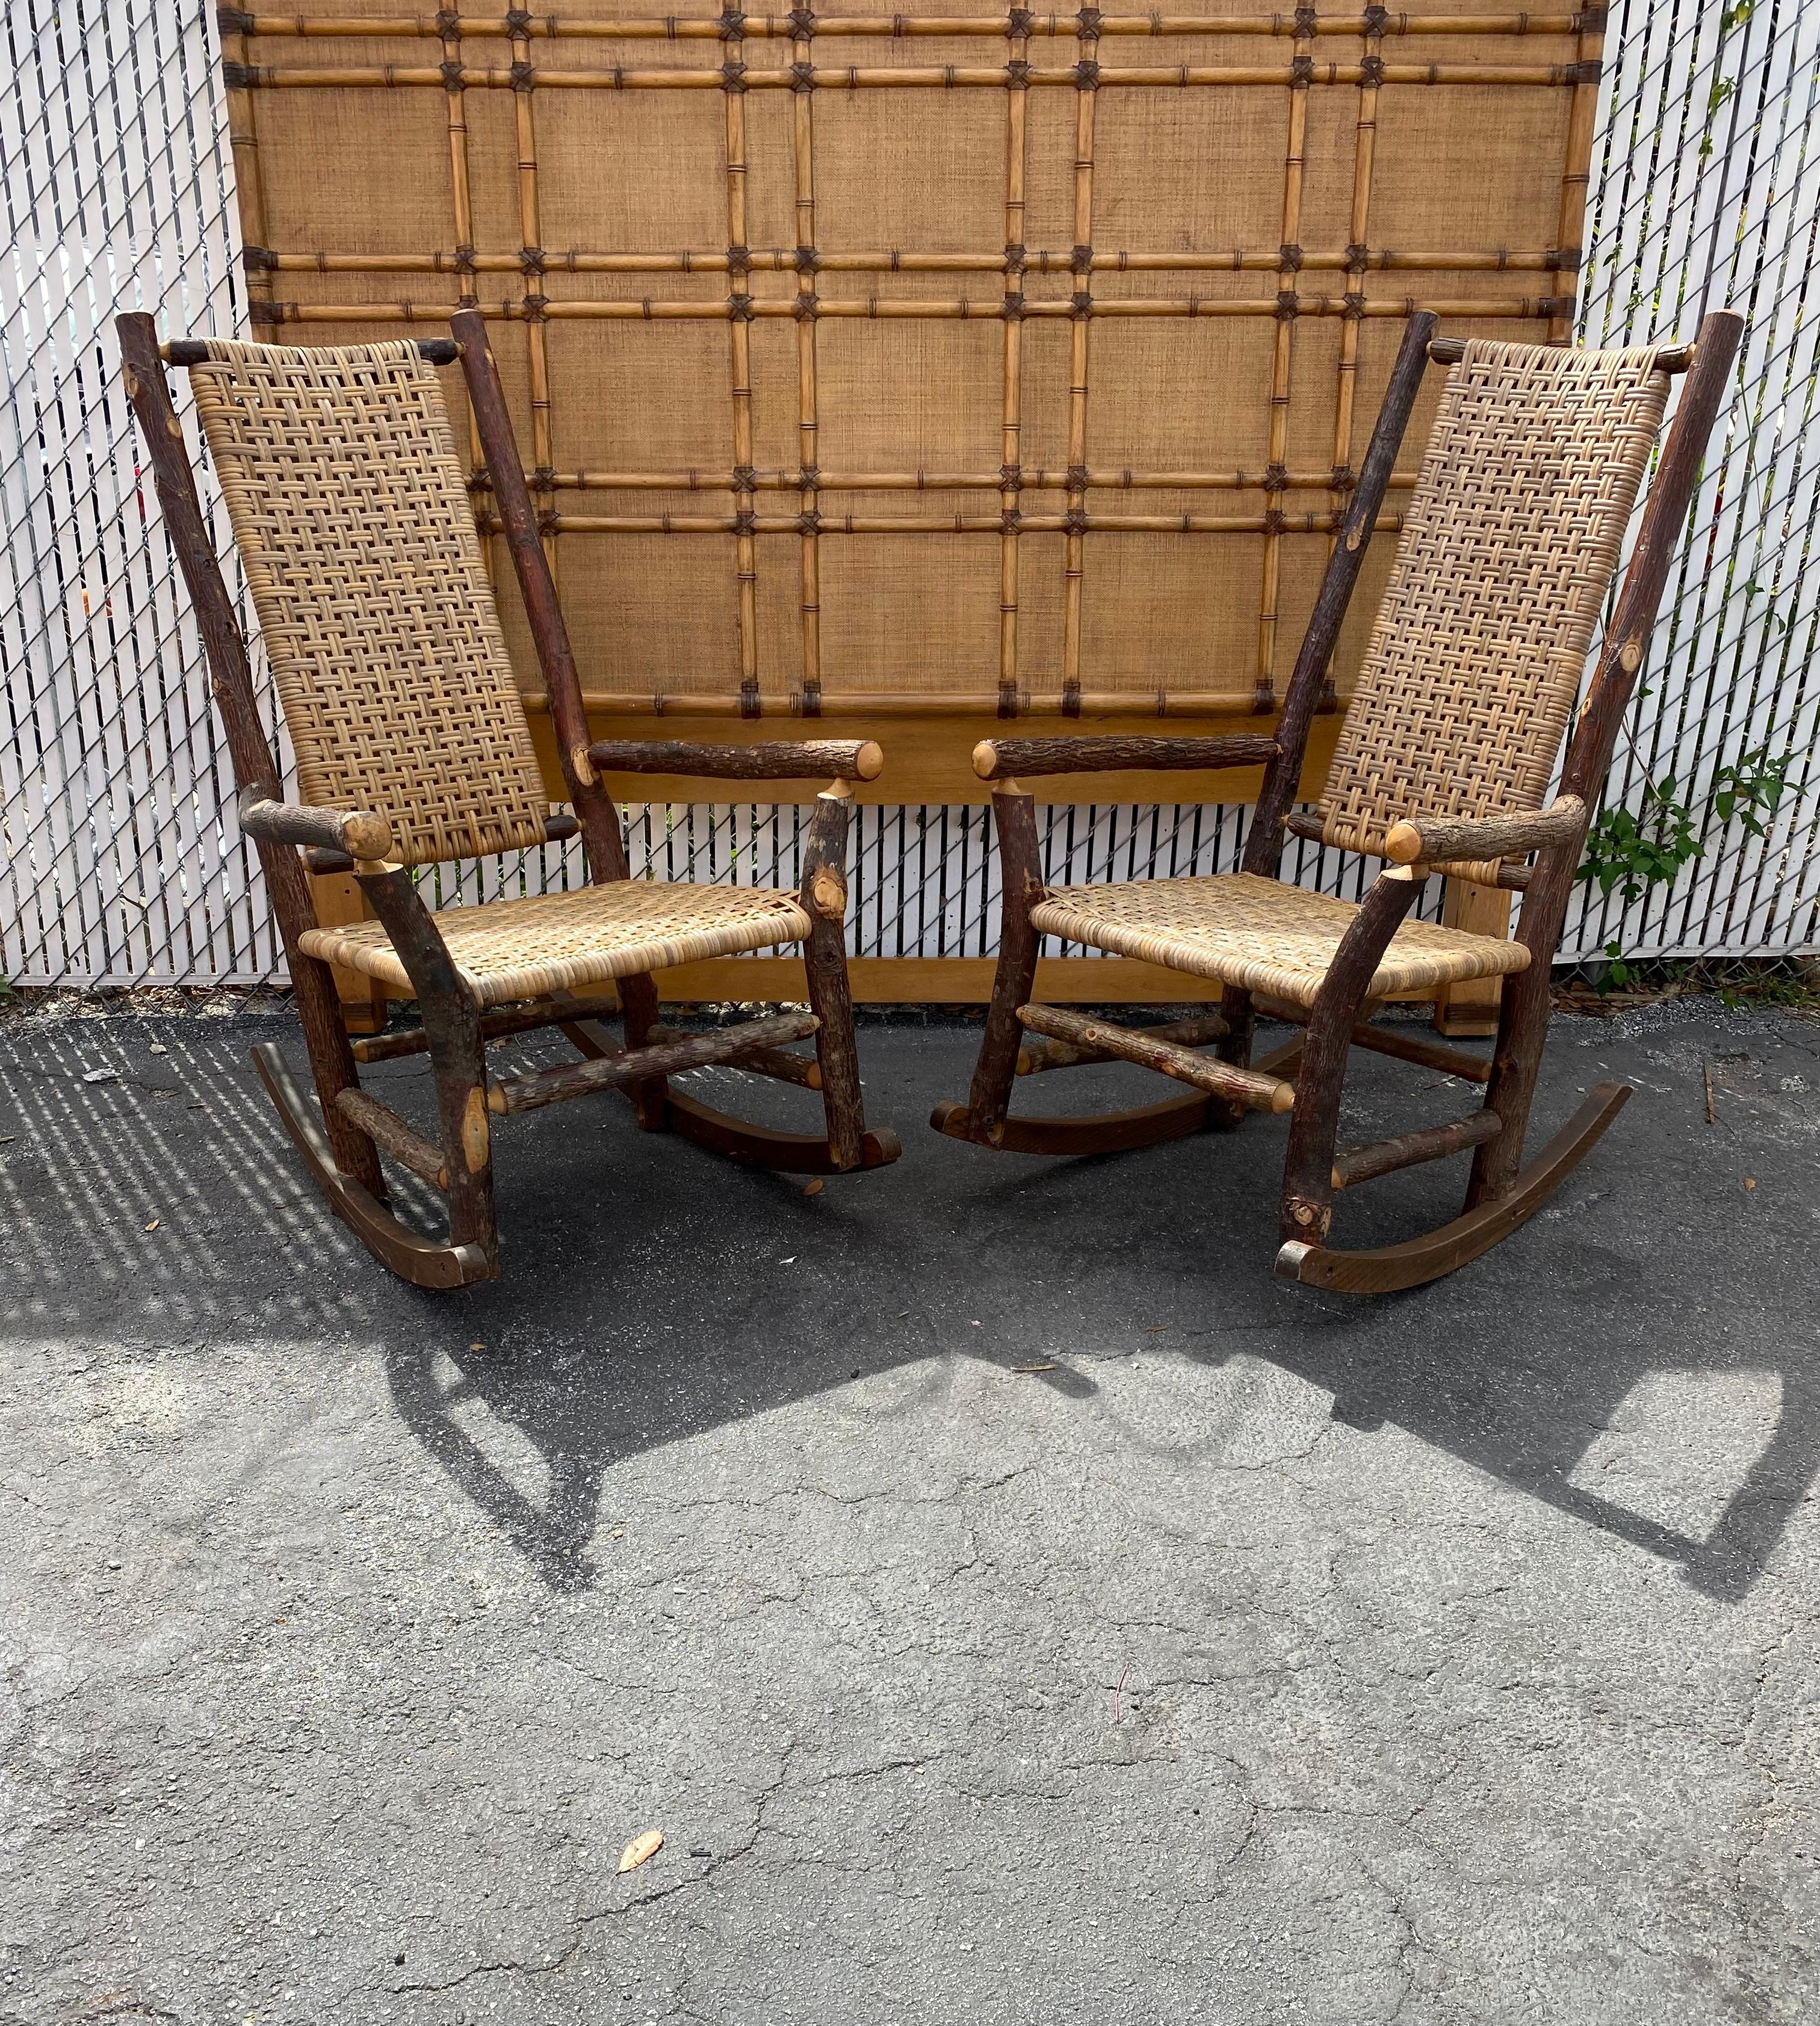 On offer on this occasion is one of the most stunning and rare rattan rocking chairs set you could hope to find. Outstanding design is exhibited throughout. The beautiful set is statement piece which is also extremely comfortable and packed with